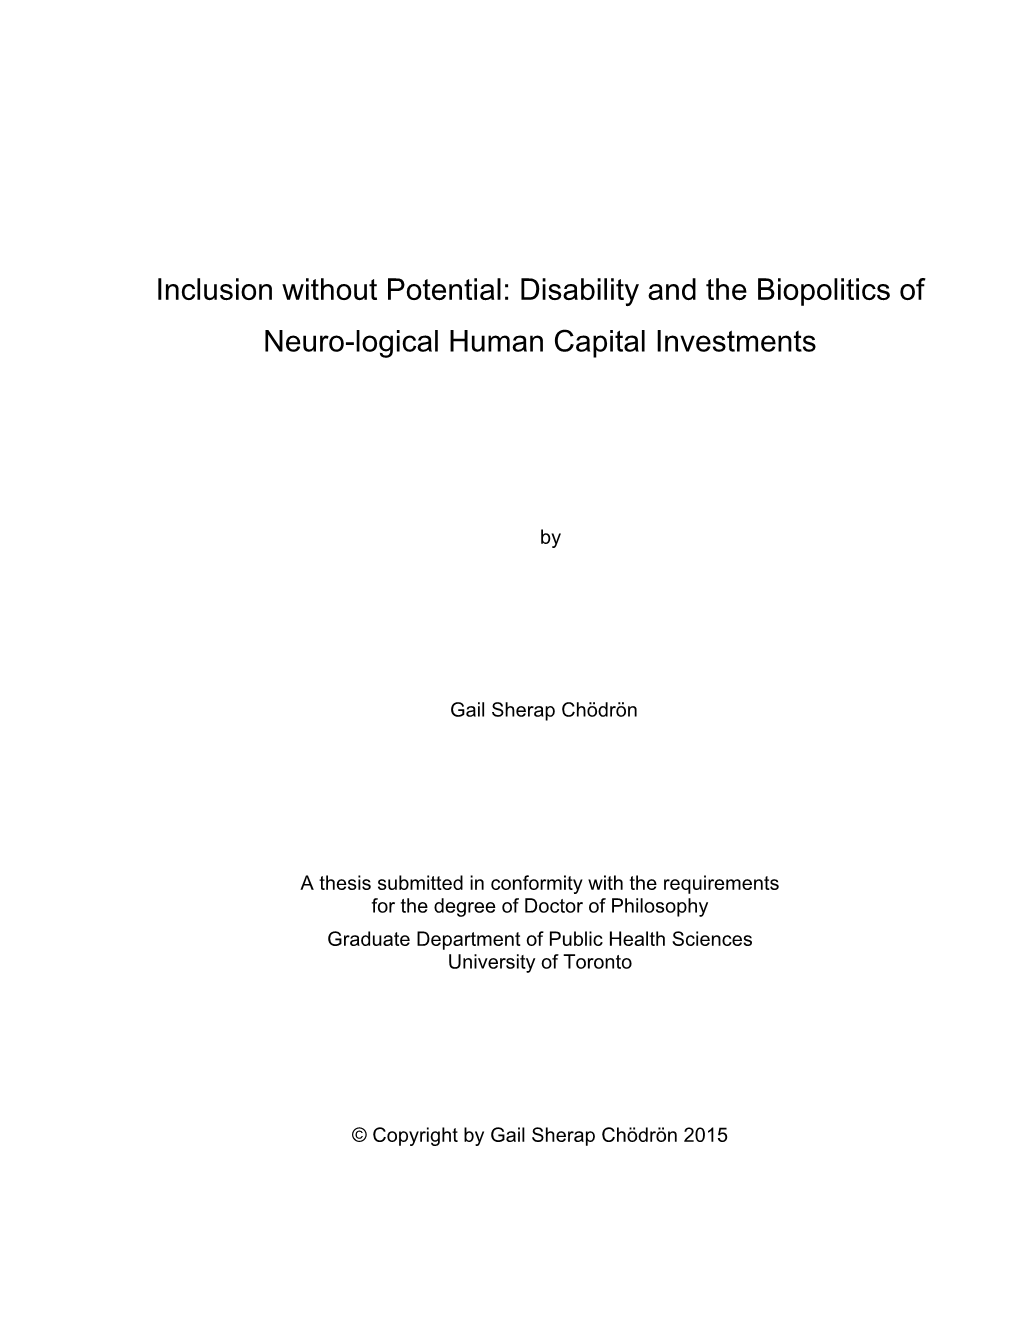 Inclusion Without Potential: Disability and the Biopolitics of Neuro-Logical Human Capital Investments